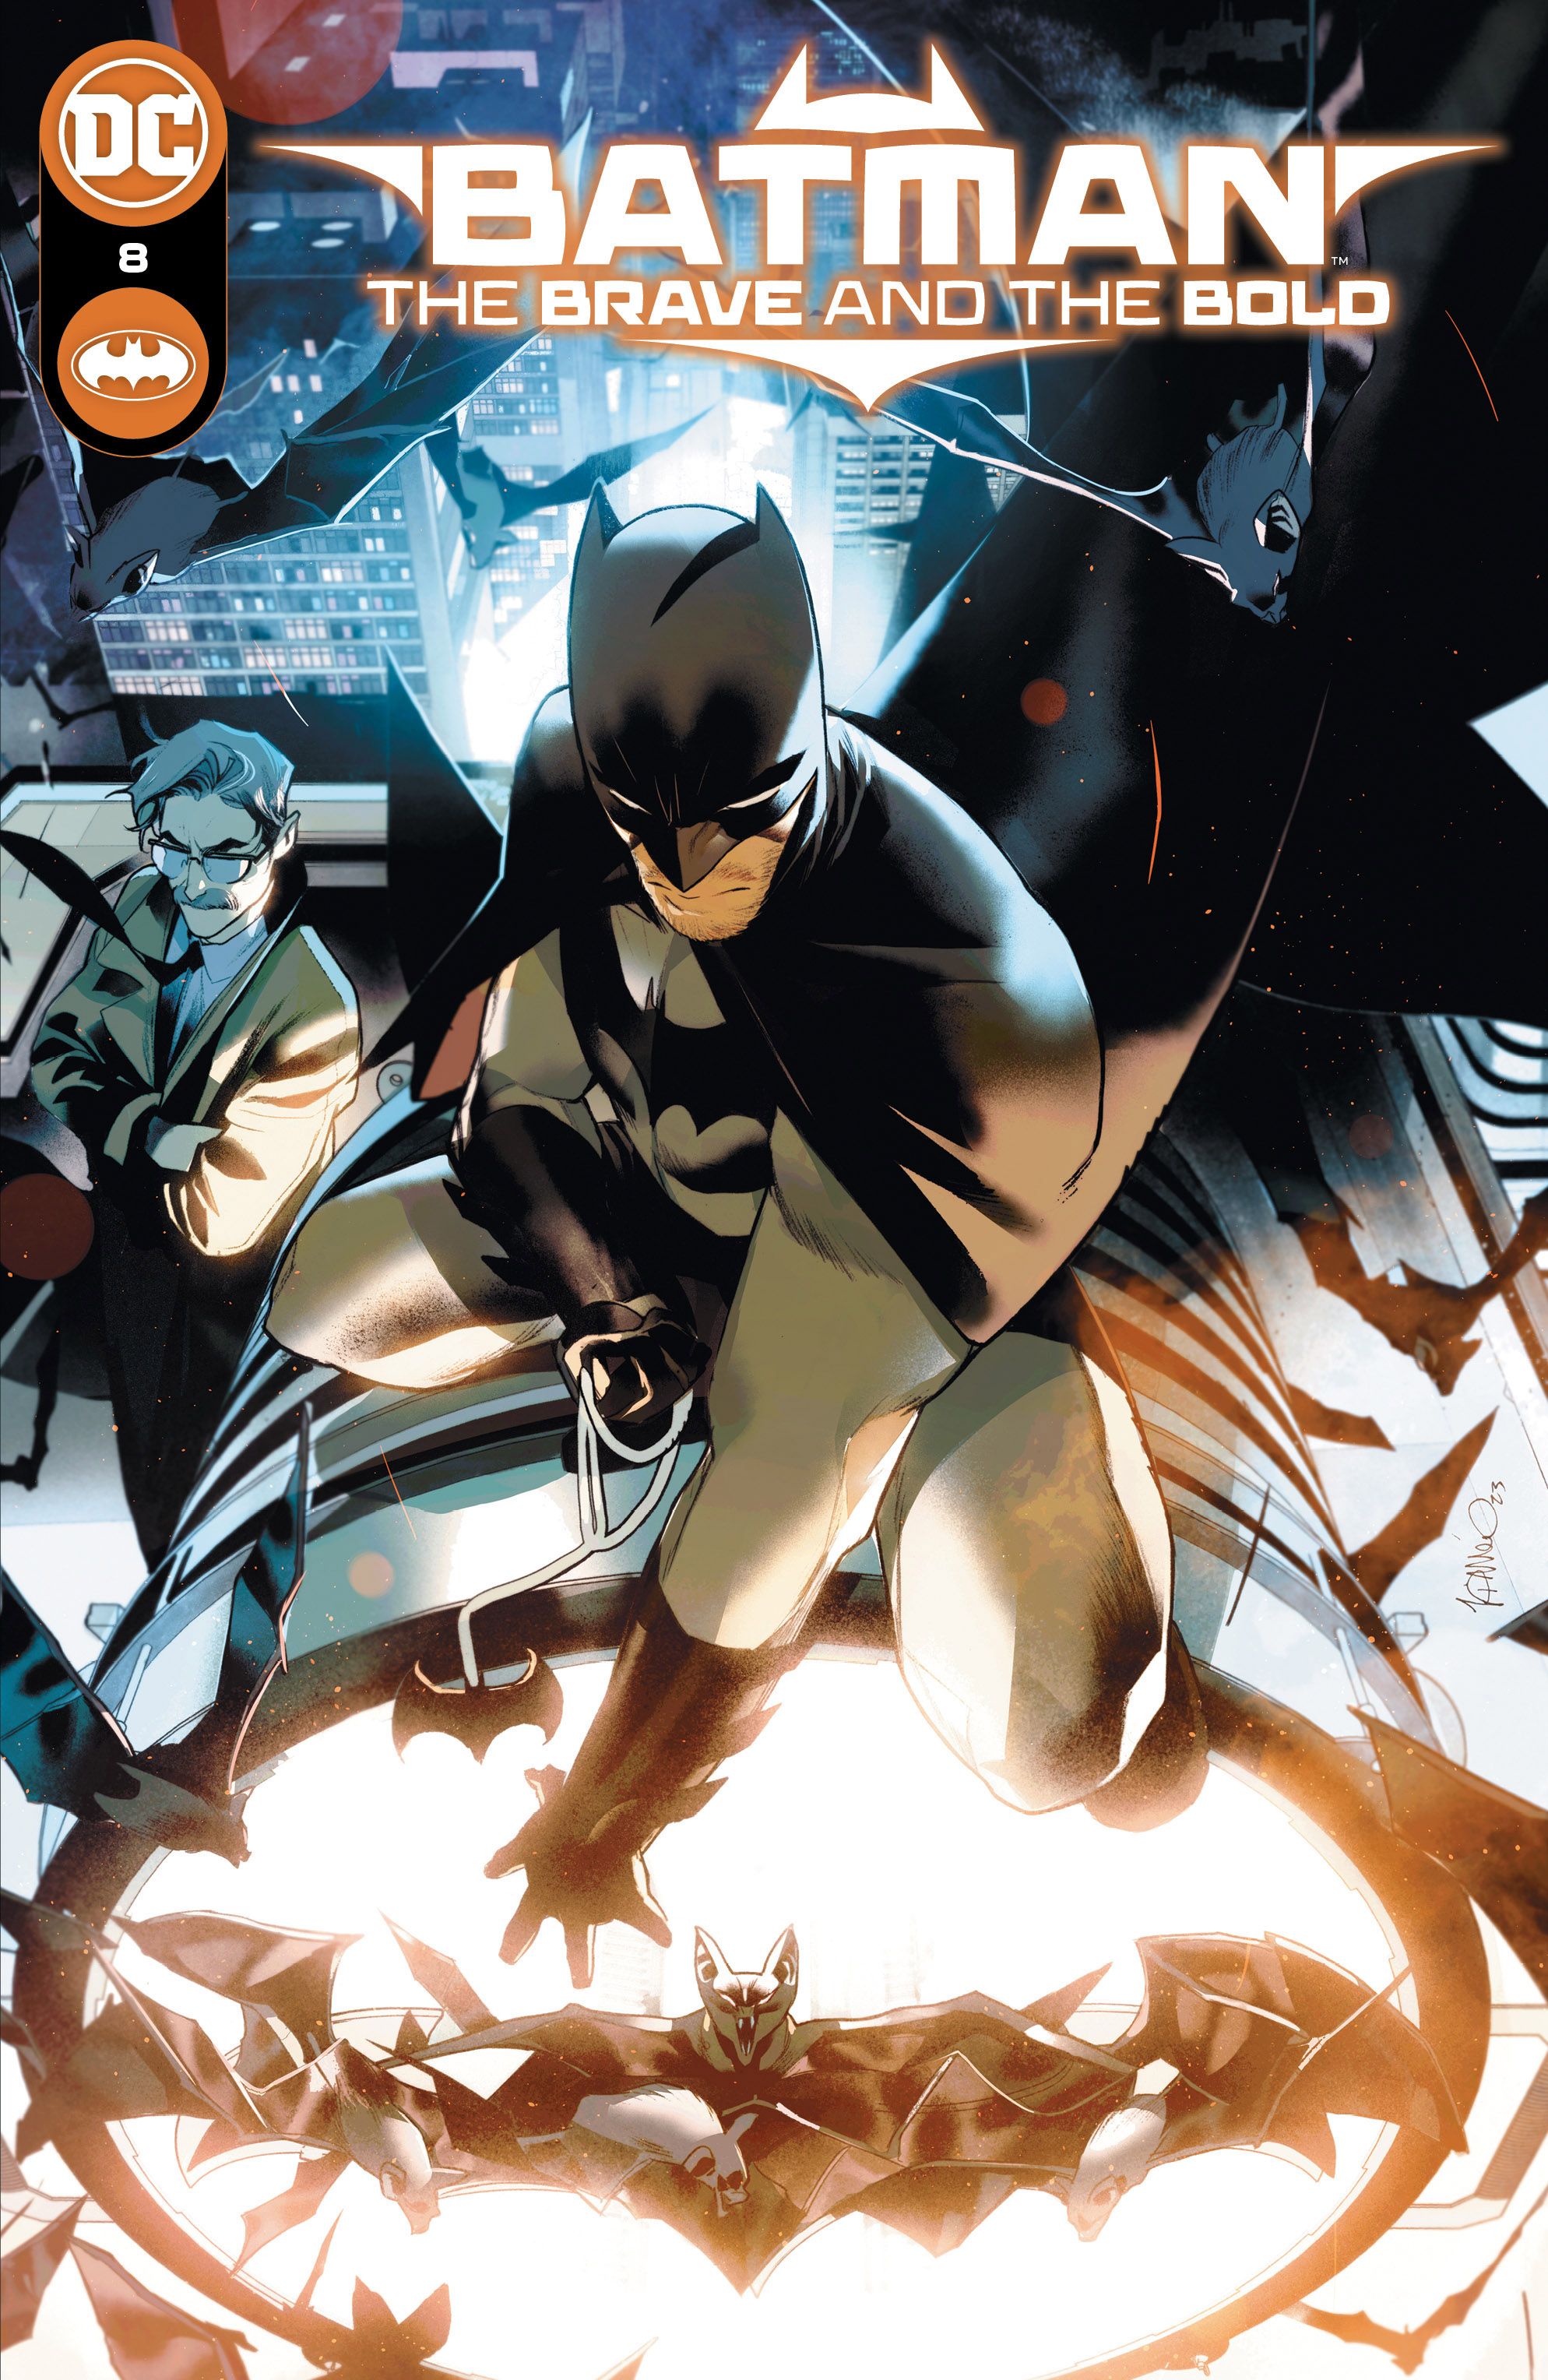 Batman: The Brave and the Bold #8 Comic